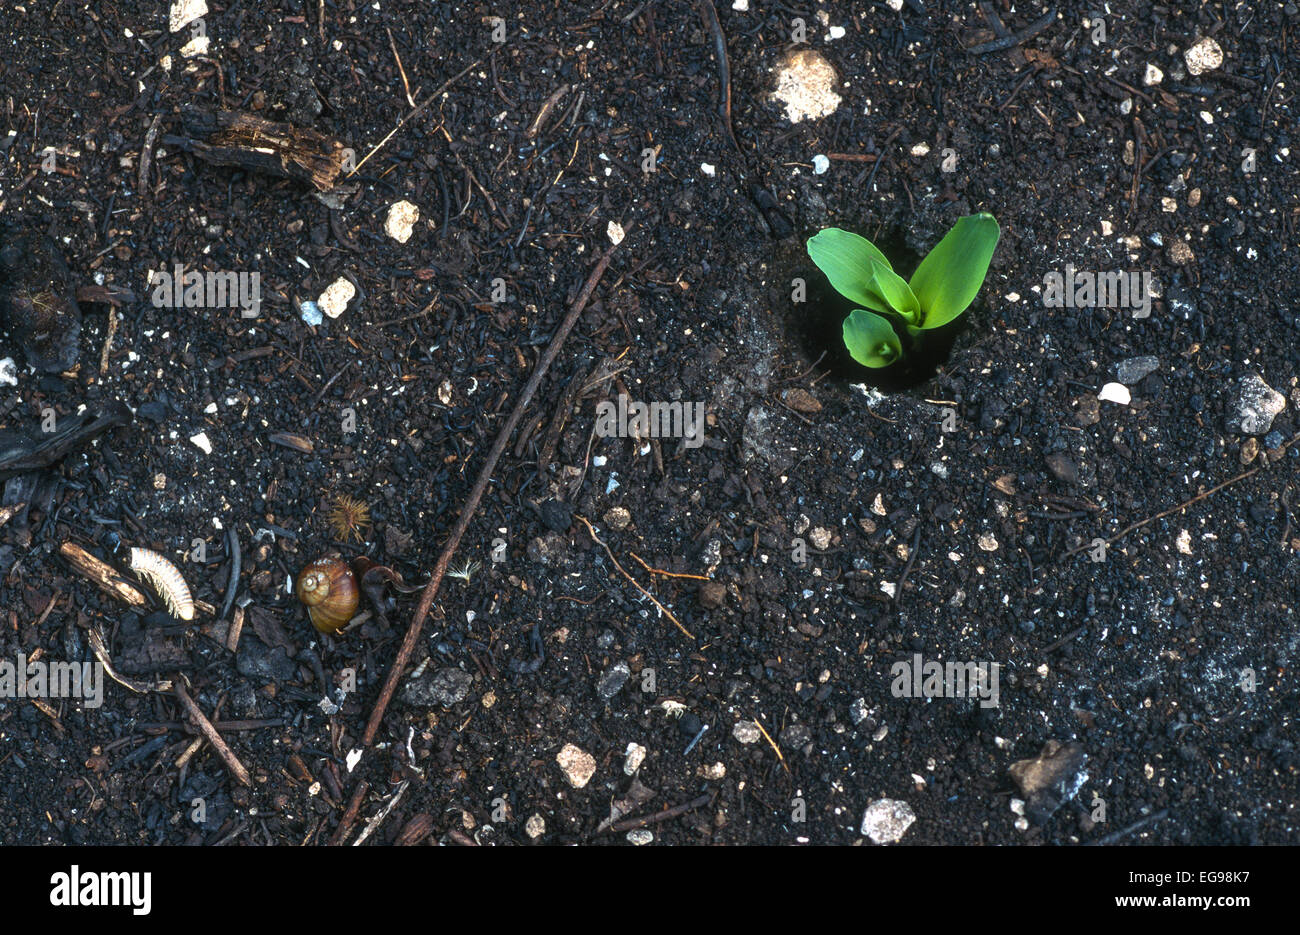 Corn seedlings emerging from soil on Mayan farm 2 weeks after the field was cleared of tropical rainforest and burned for agricultural land. Zea mays Stock Photo